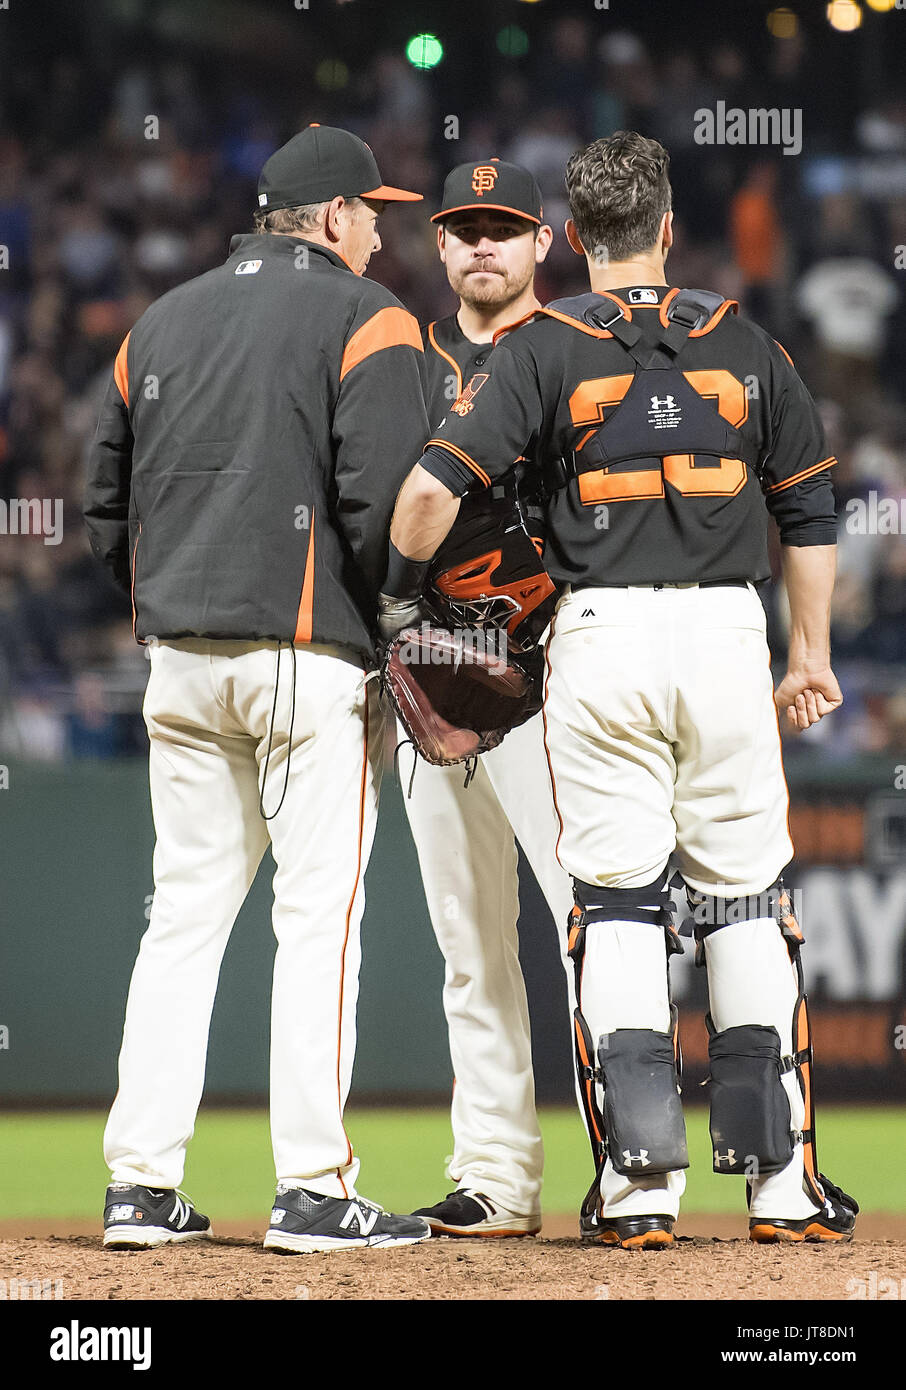 San Francisco, California, USA. 07th Aug, 2017. August 07, 2017: San Francisco Giants pitching coach Dave Righetti (19) and catcher Buster Posey (28) approach the mound to calm starting pitcher Matt Moore (45) in the fifth inning, during a MLB game between the Chicago Cubs and the San Francisco Giants at AT&T Park in San Francisco, California. Valerie Shoaps/CSM Credit: Cal Sport Media/Alamy Live News Stock Photo